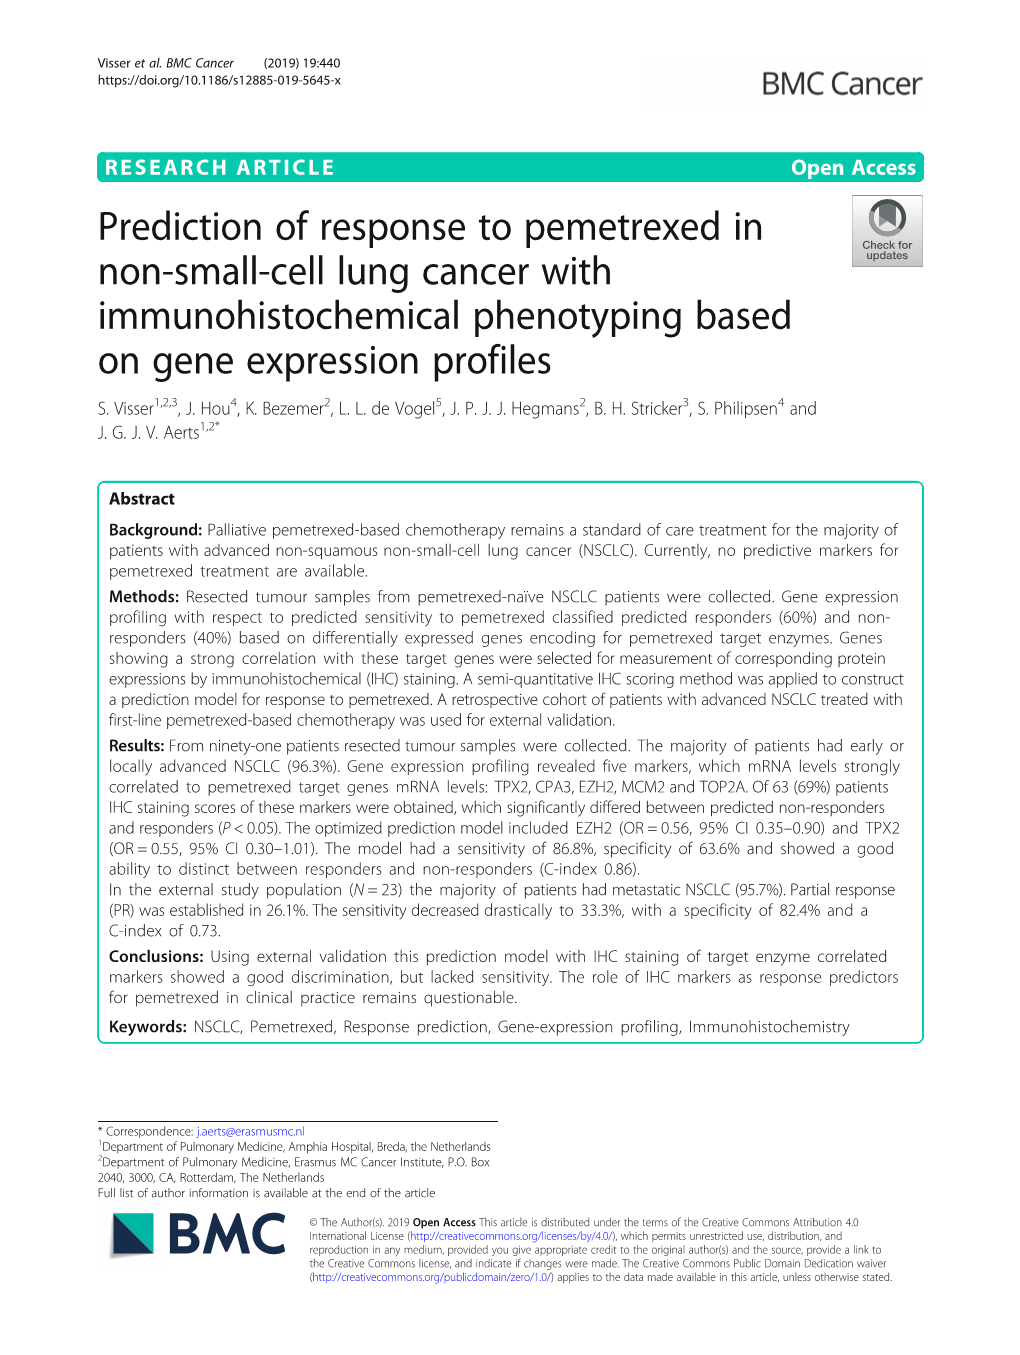 Prediction of Response to Pemetrexed in Non-Small-Cell Lung Cancer with Immunohistochemical Phenotyping Based on Gene Expression Profiles S